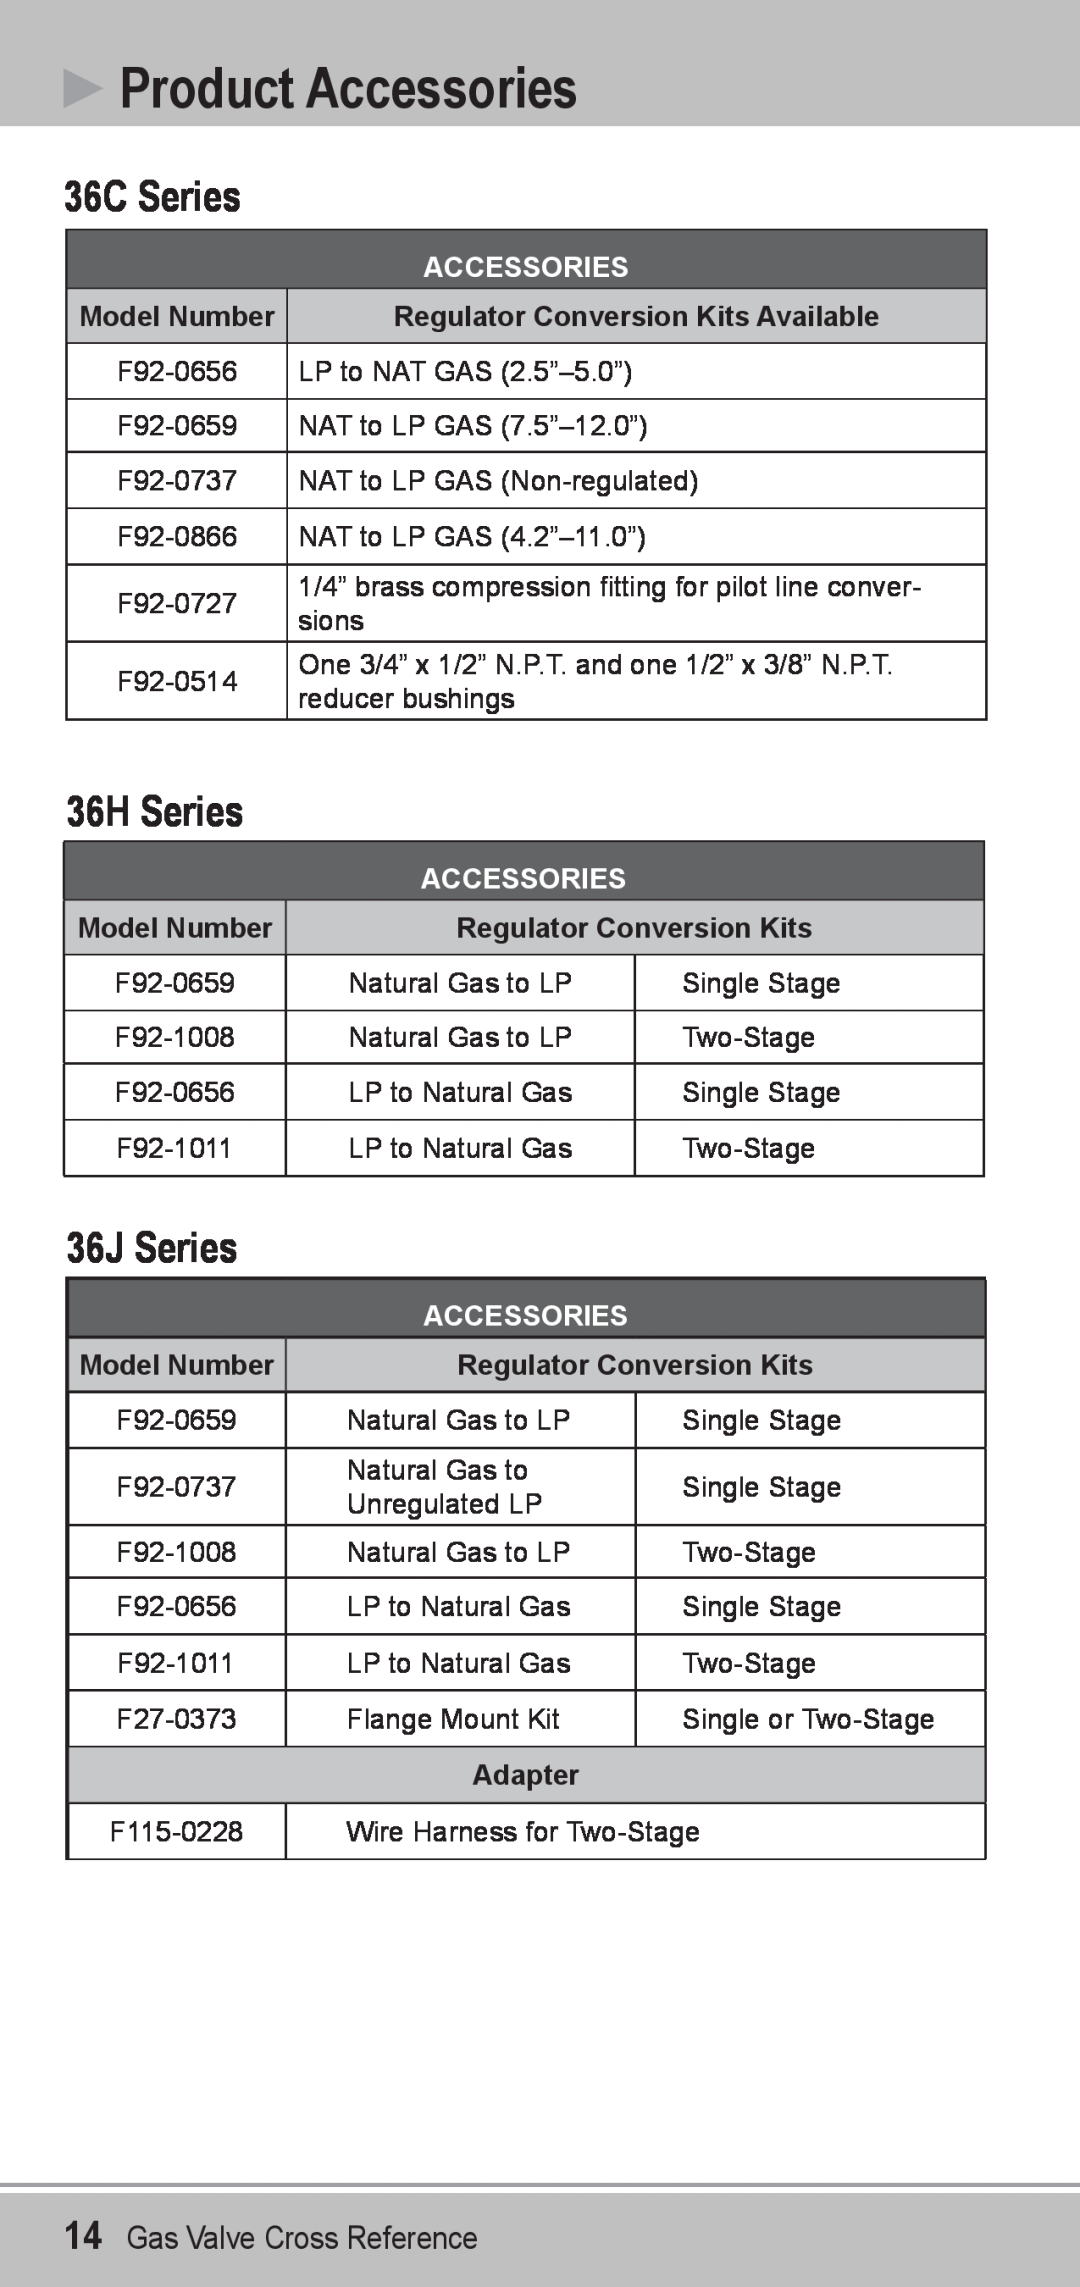 Emerson manual Product Accessories, 36C Series, 36H Series, 36J Series, Regulator Conversion Kits Available, Adapter 